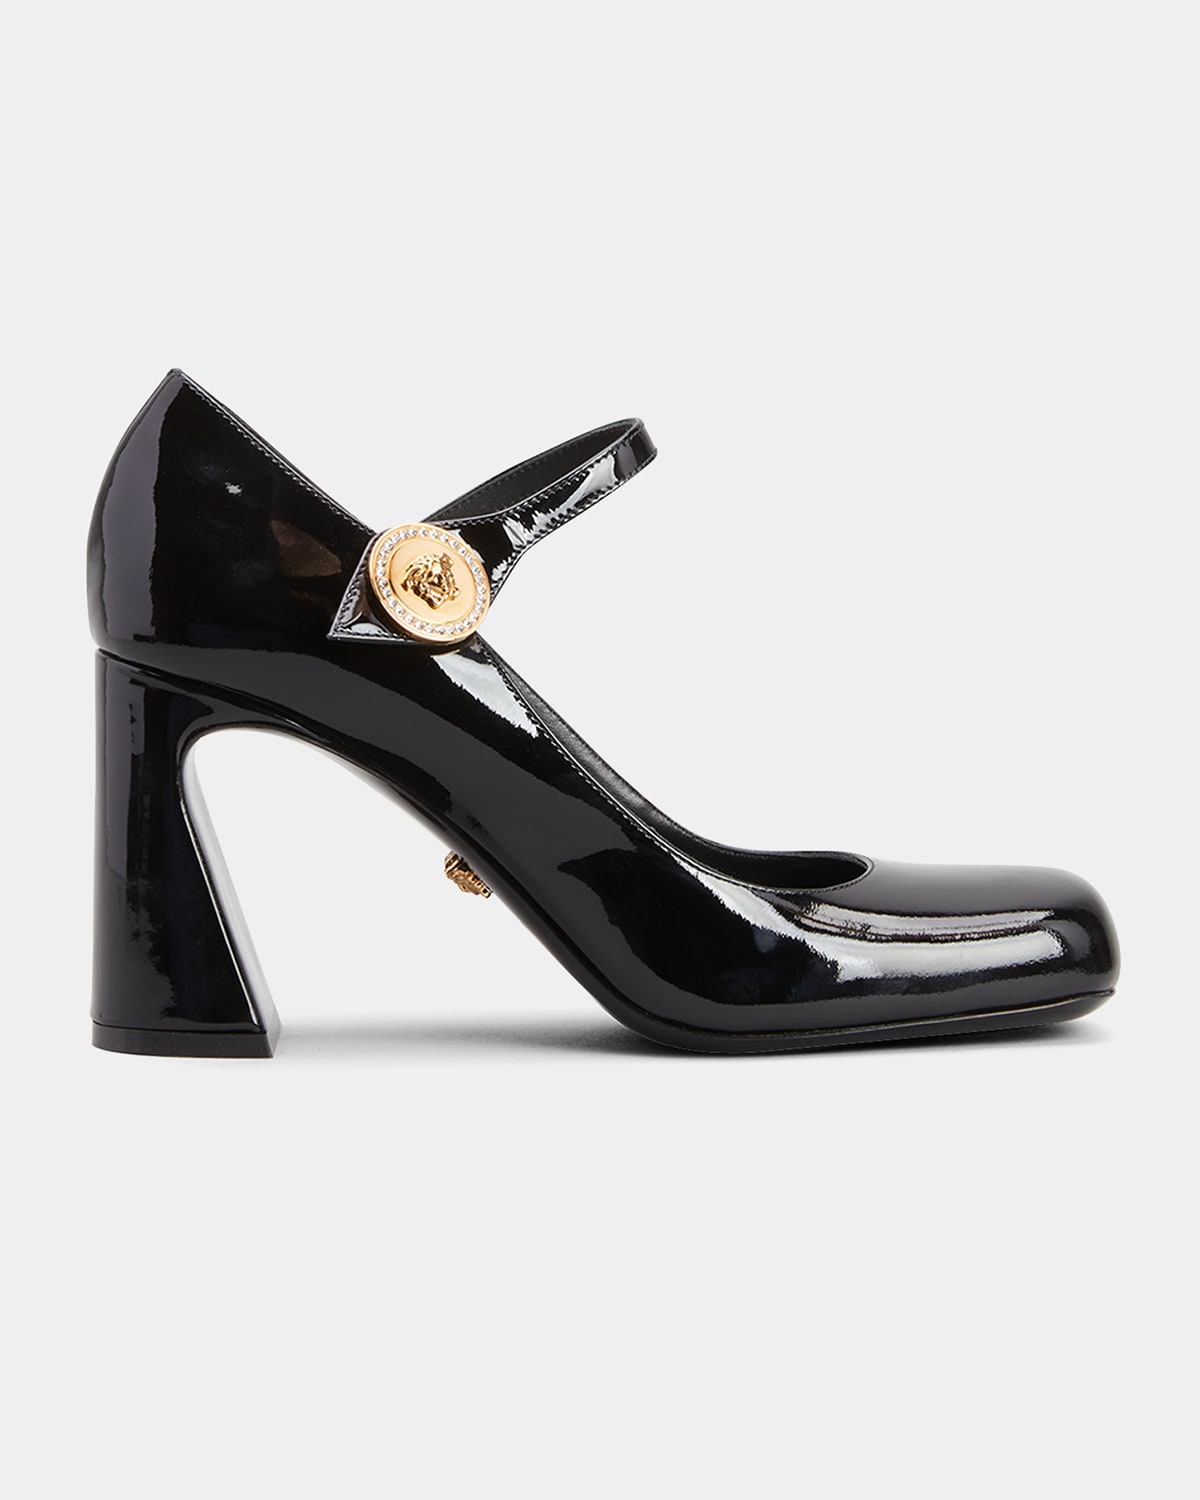 VERSACE PATENT MARY JANE BUCKLE PUMPS